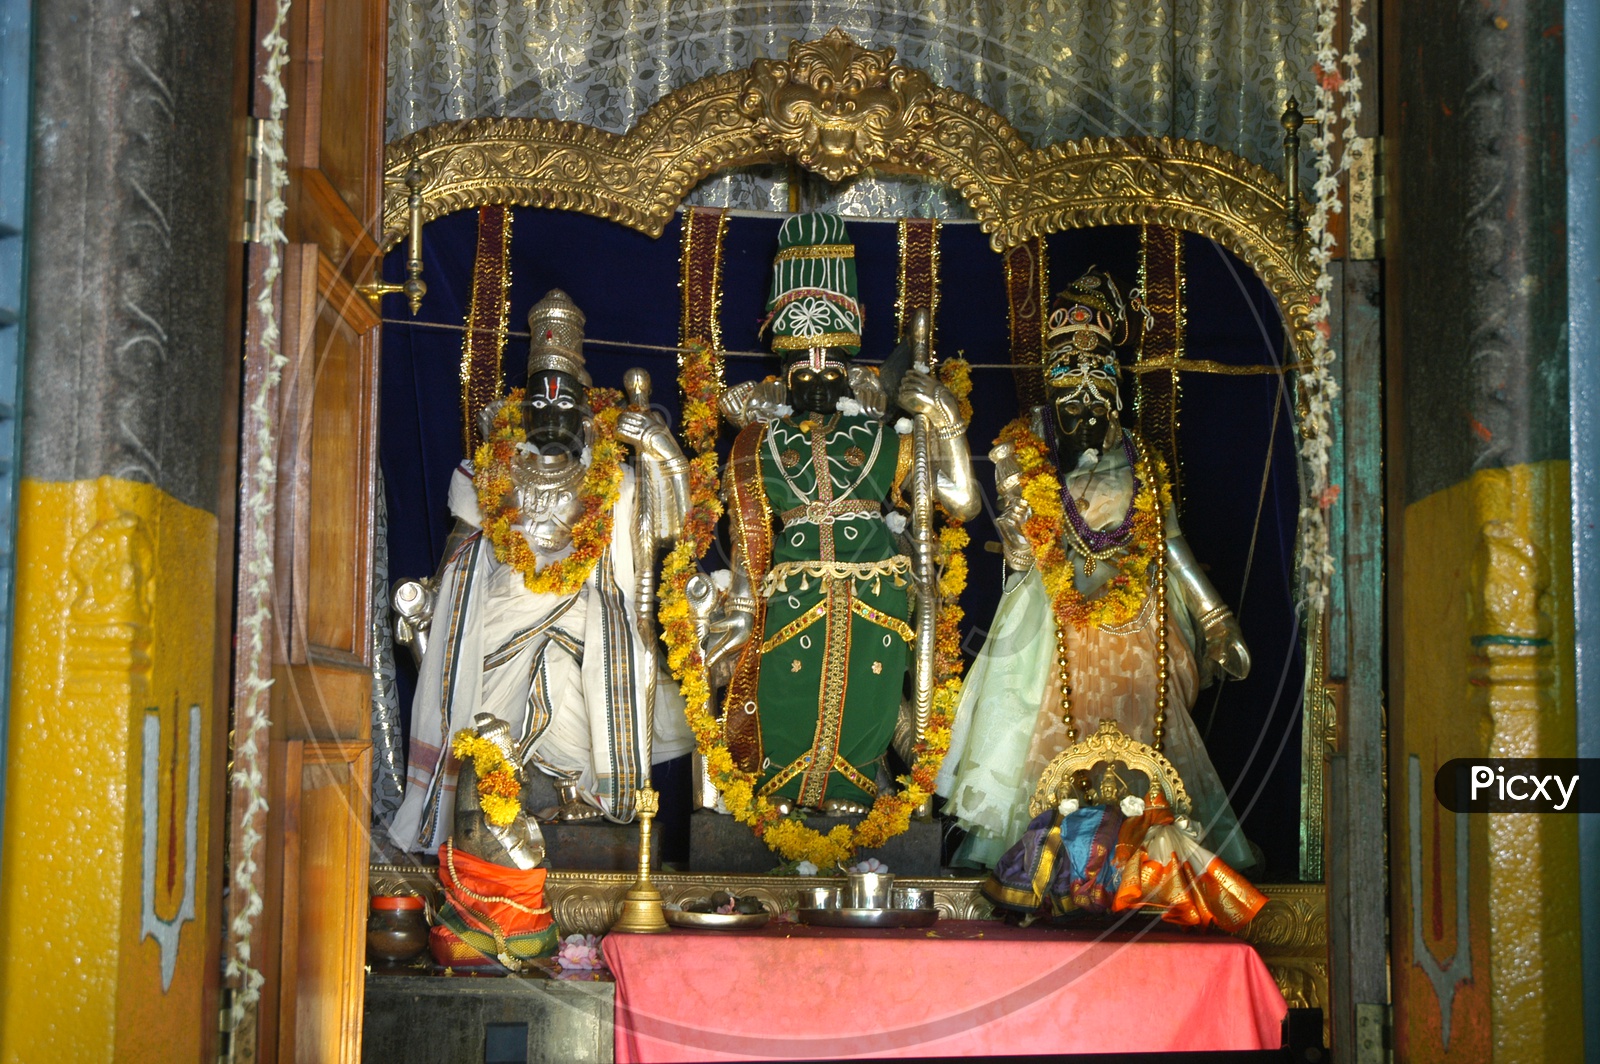 Hindu God statues decorated with garlands